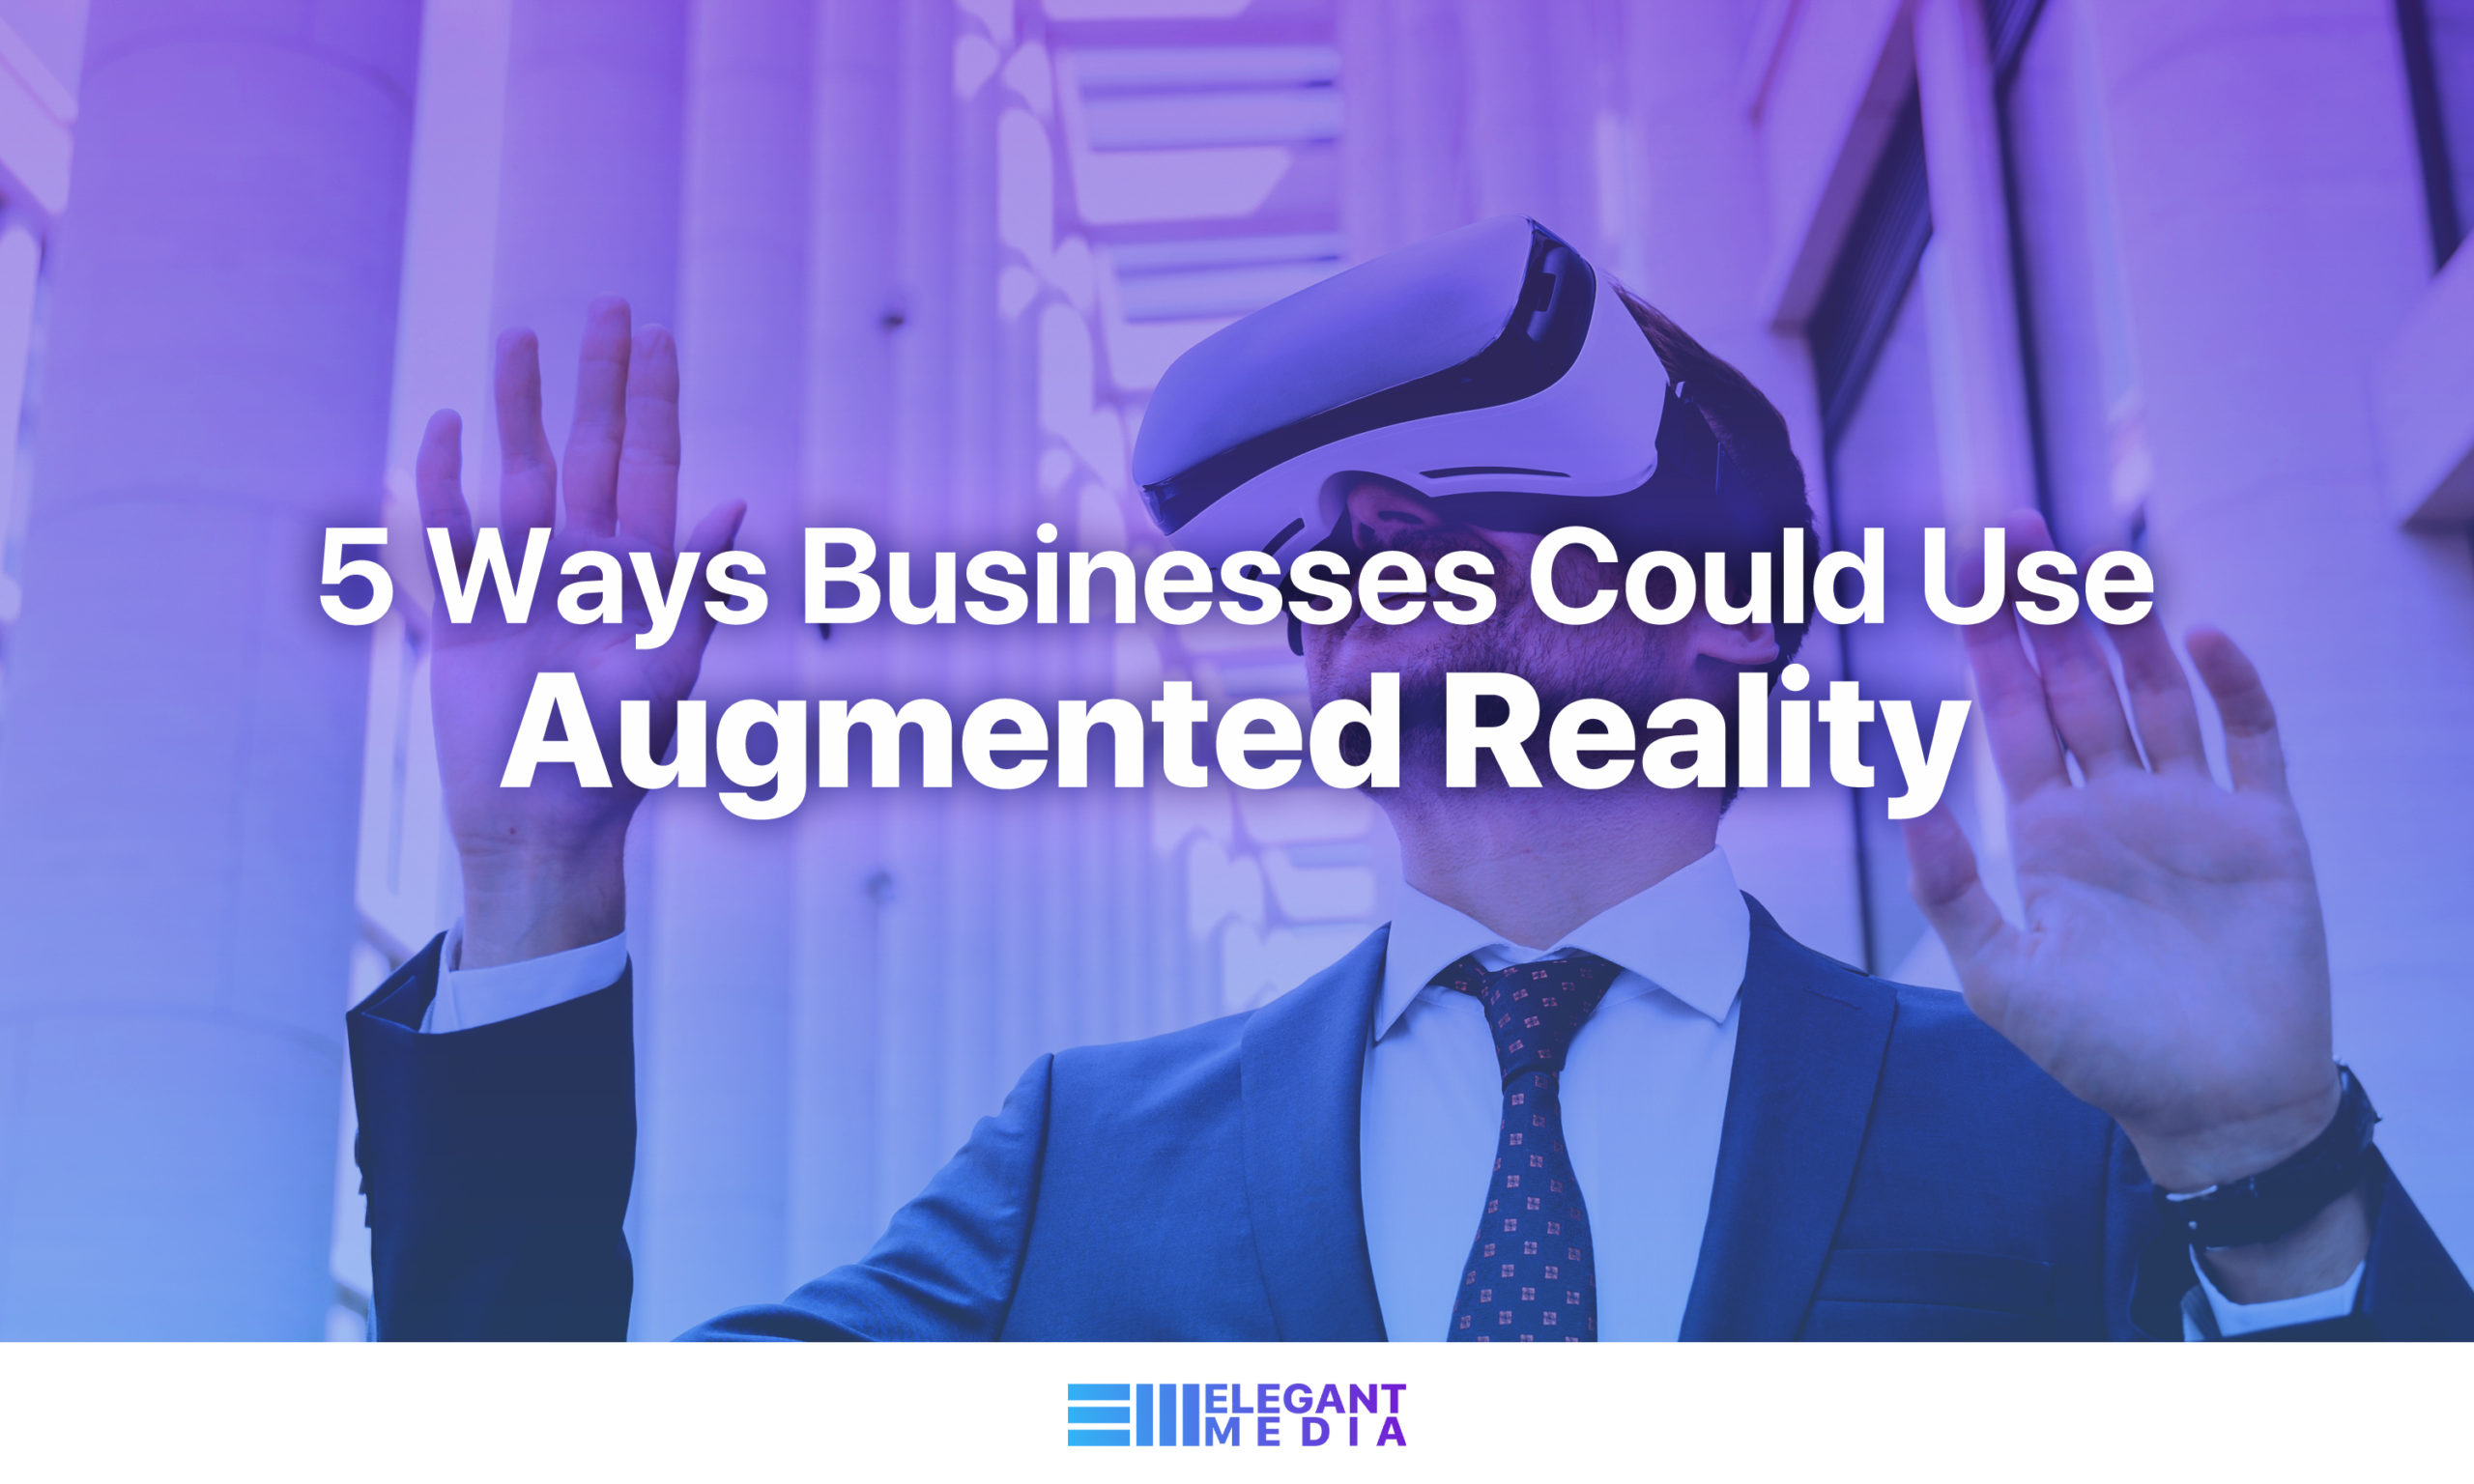 5 Ways Businesses Could Use Augmented Reality